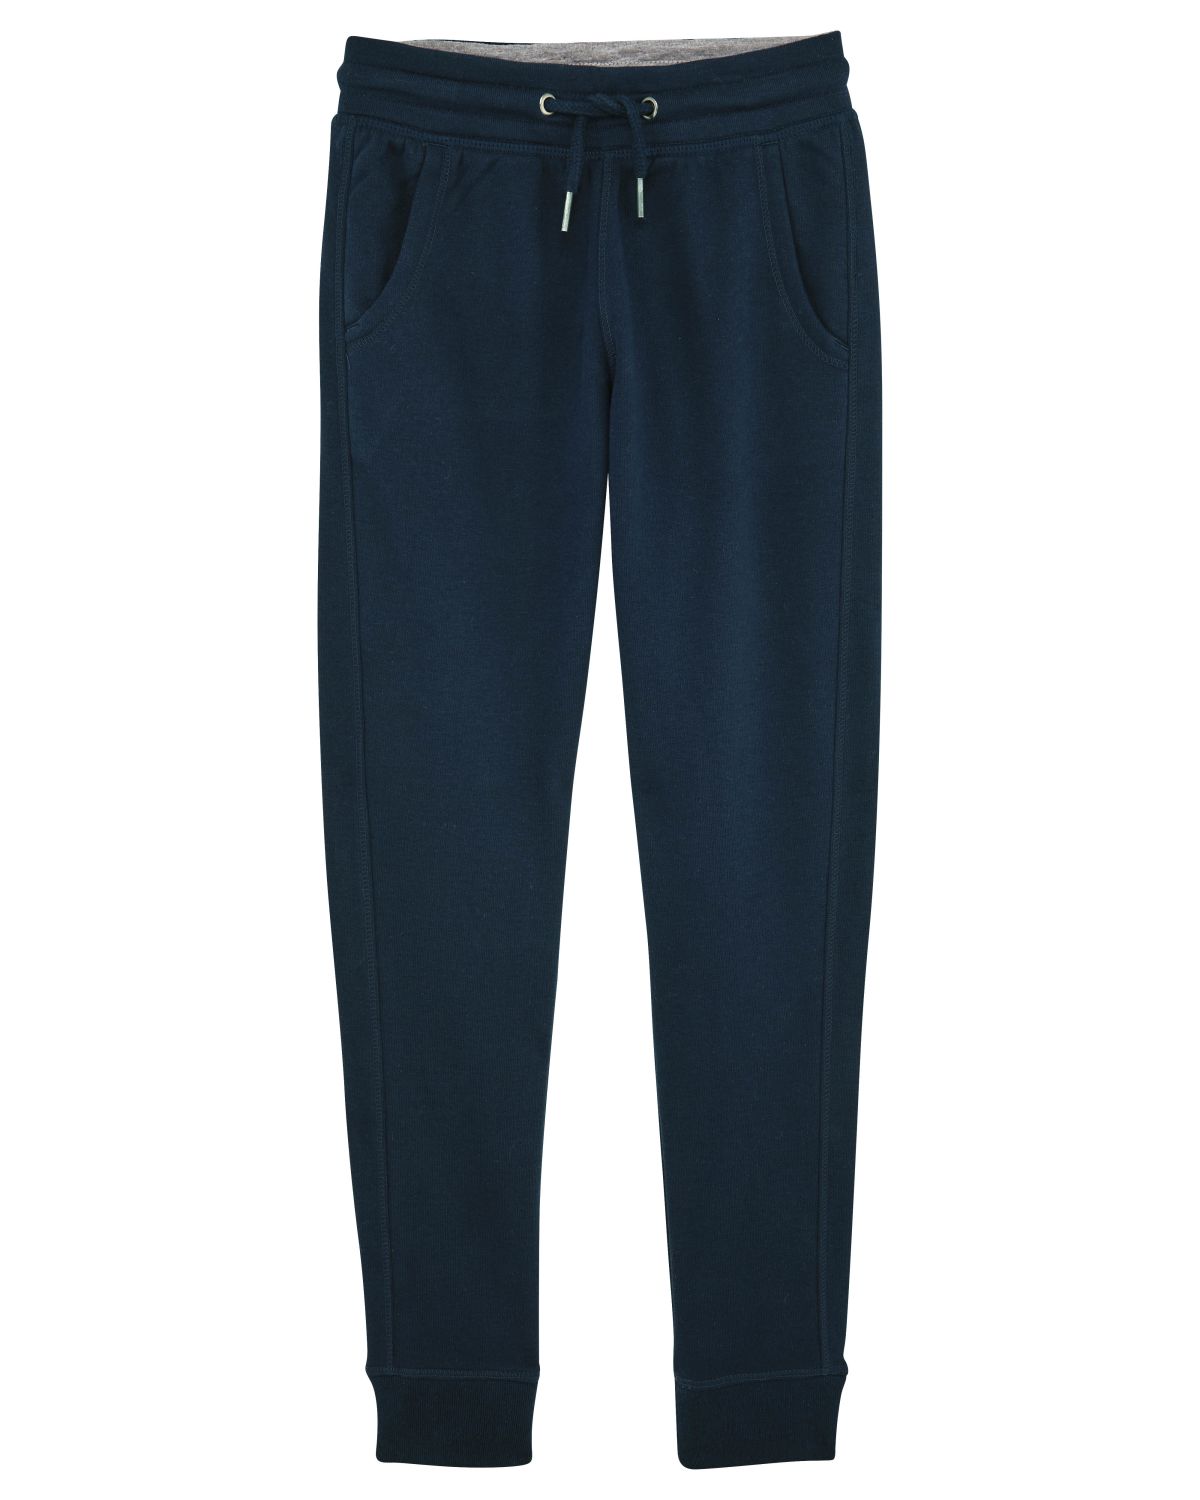 Kids French Navy Joggers